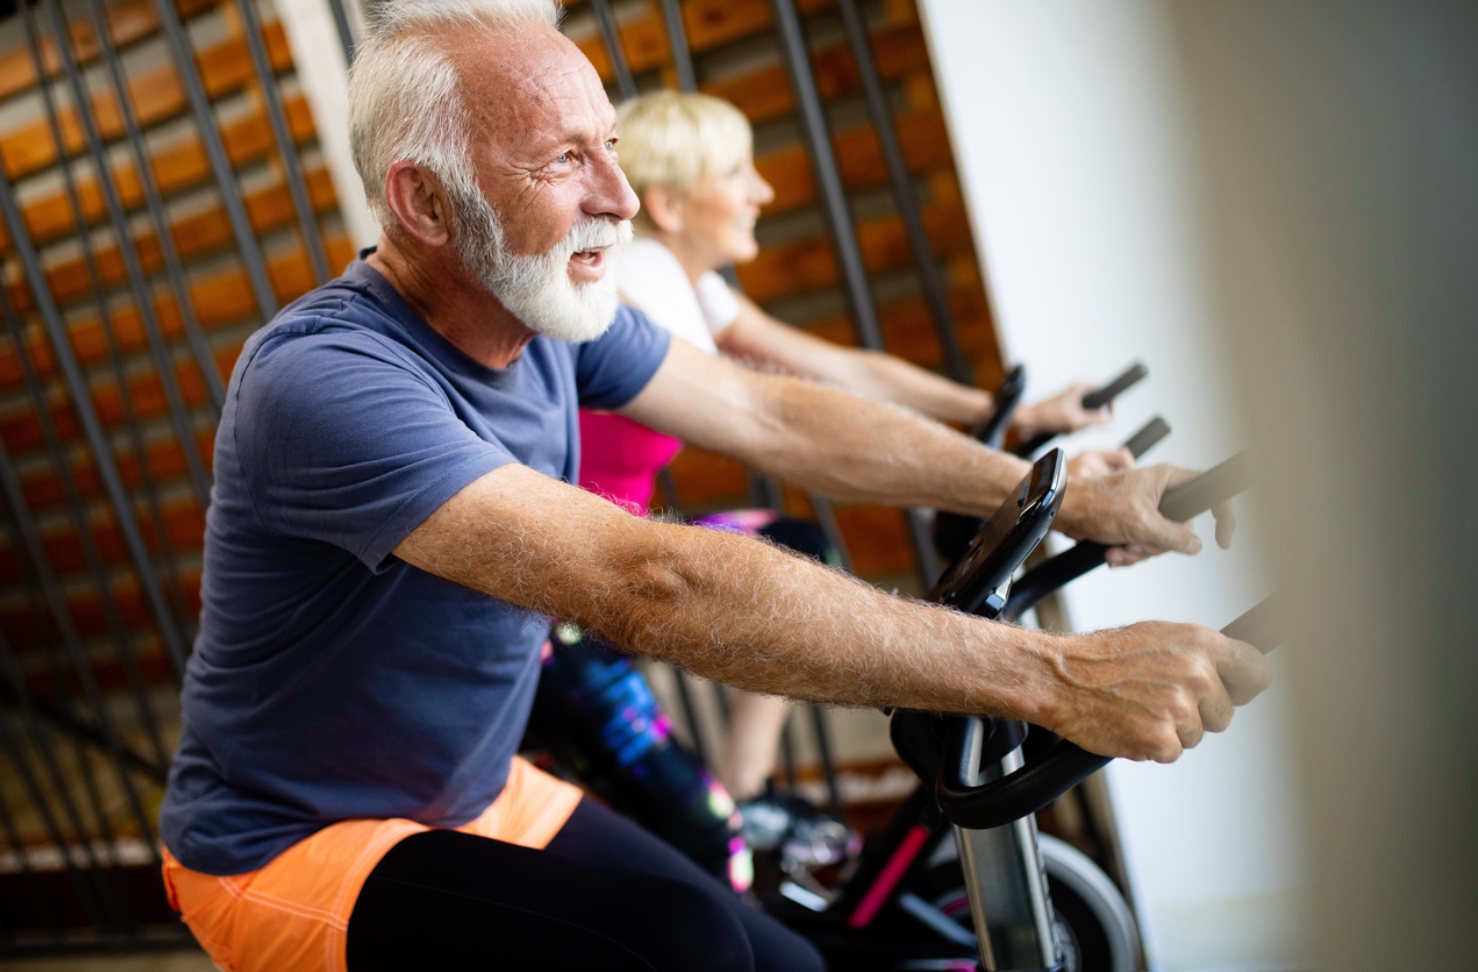 Study: Lowest Mortality Risk Found Among Adults Who Exceed Current Physical Activity Guidelines